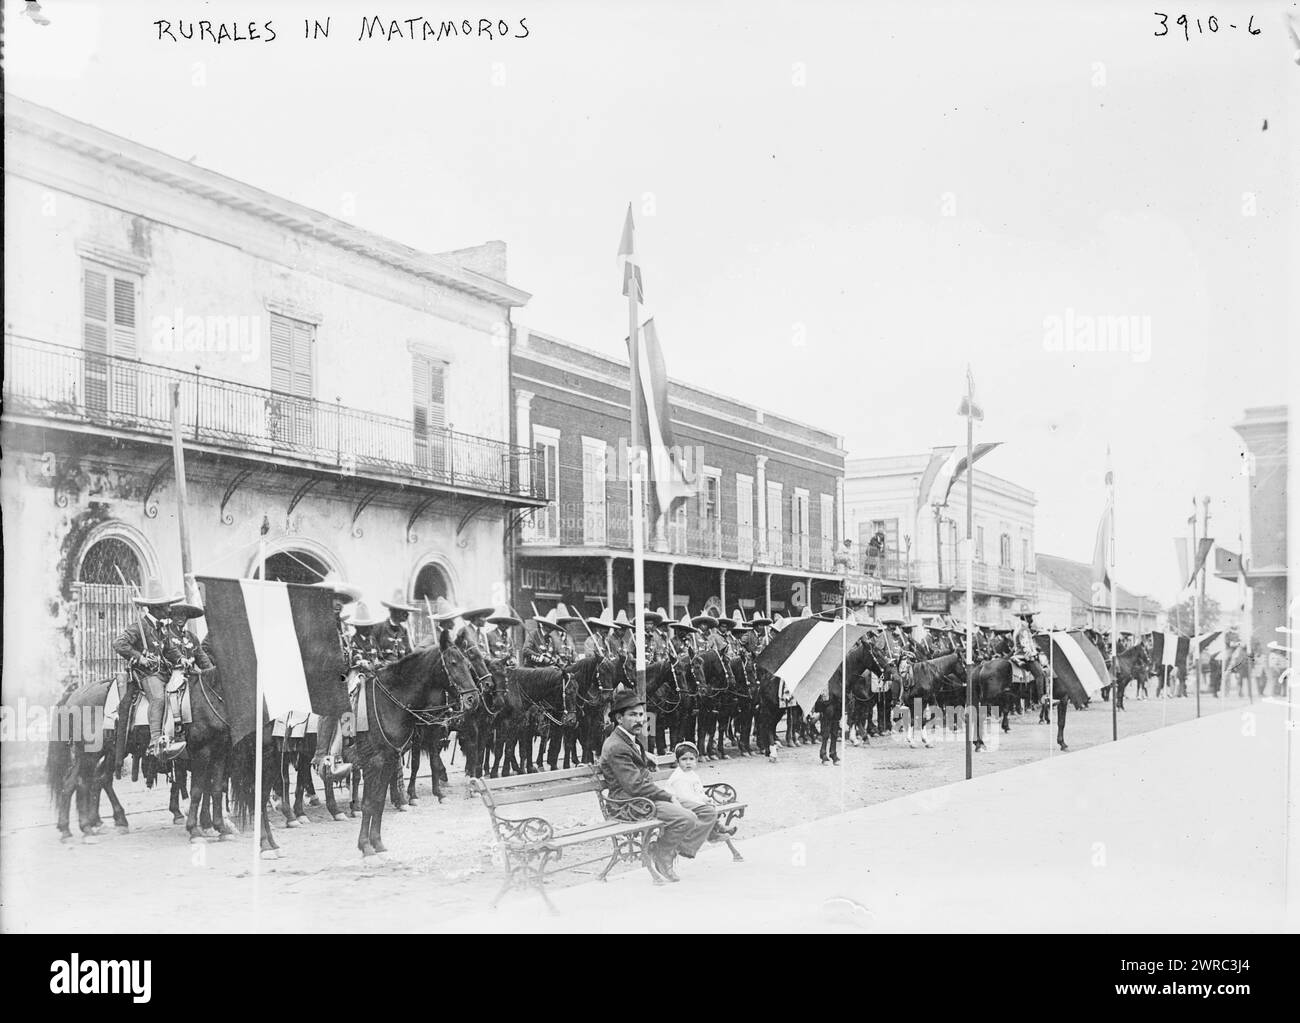 Rurales in Matamoros, Photograph shows Mexican soldiers in Matamoros, Mexico in 1913., 1913, Glass negatives, 1 negative: glass Stock Photo